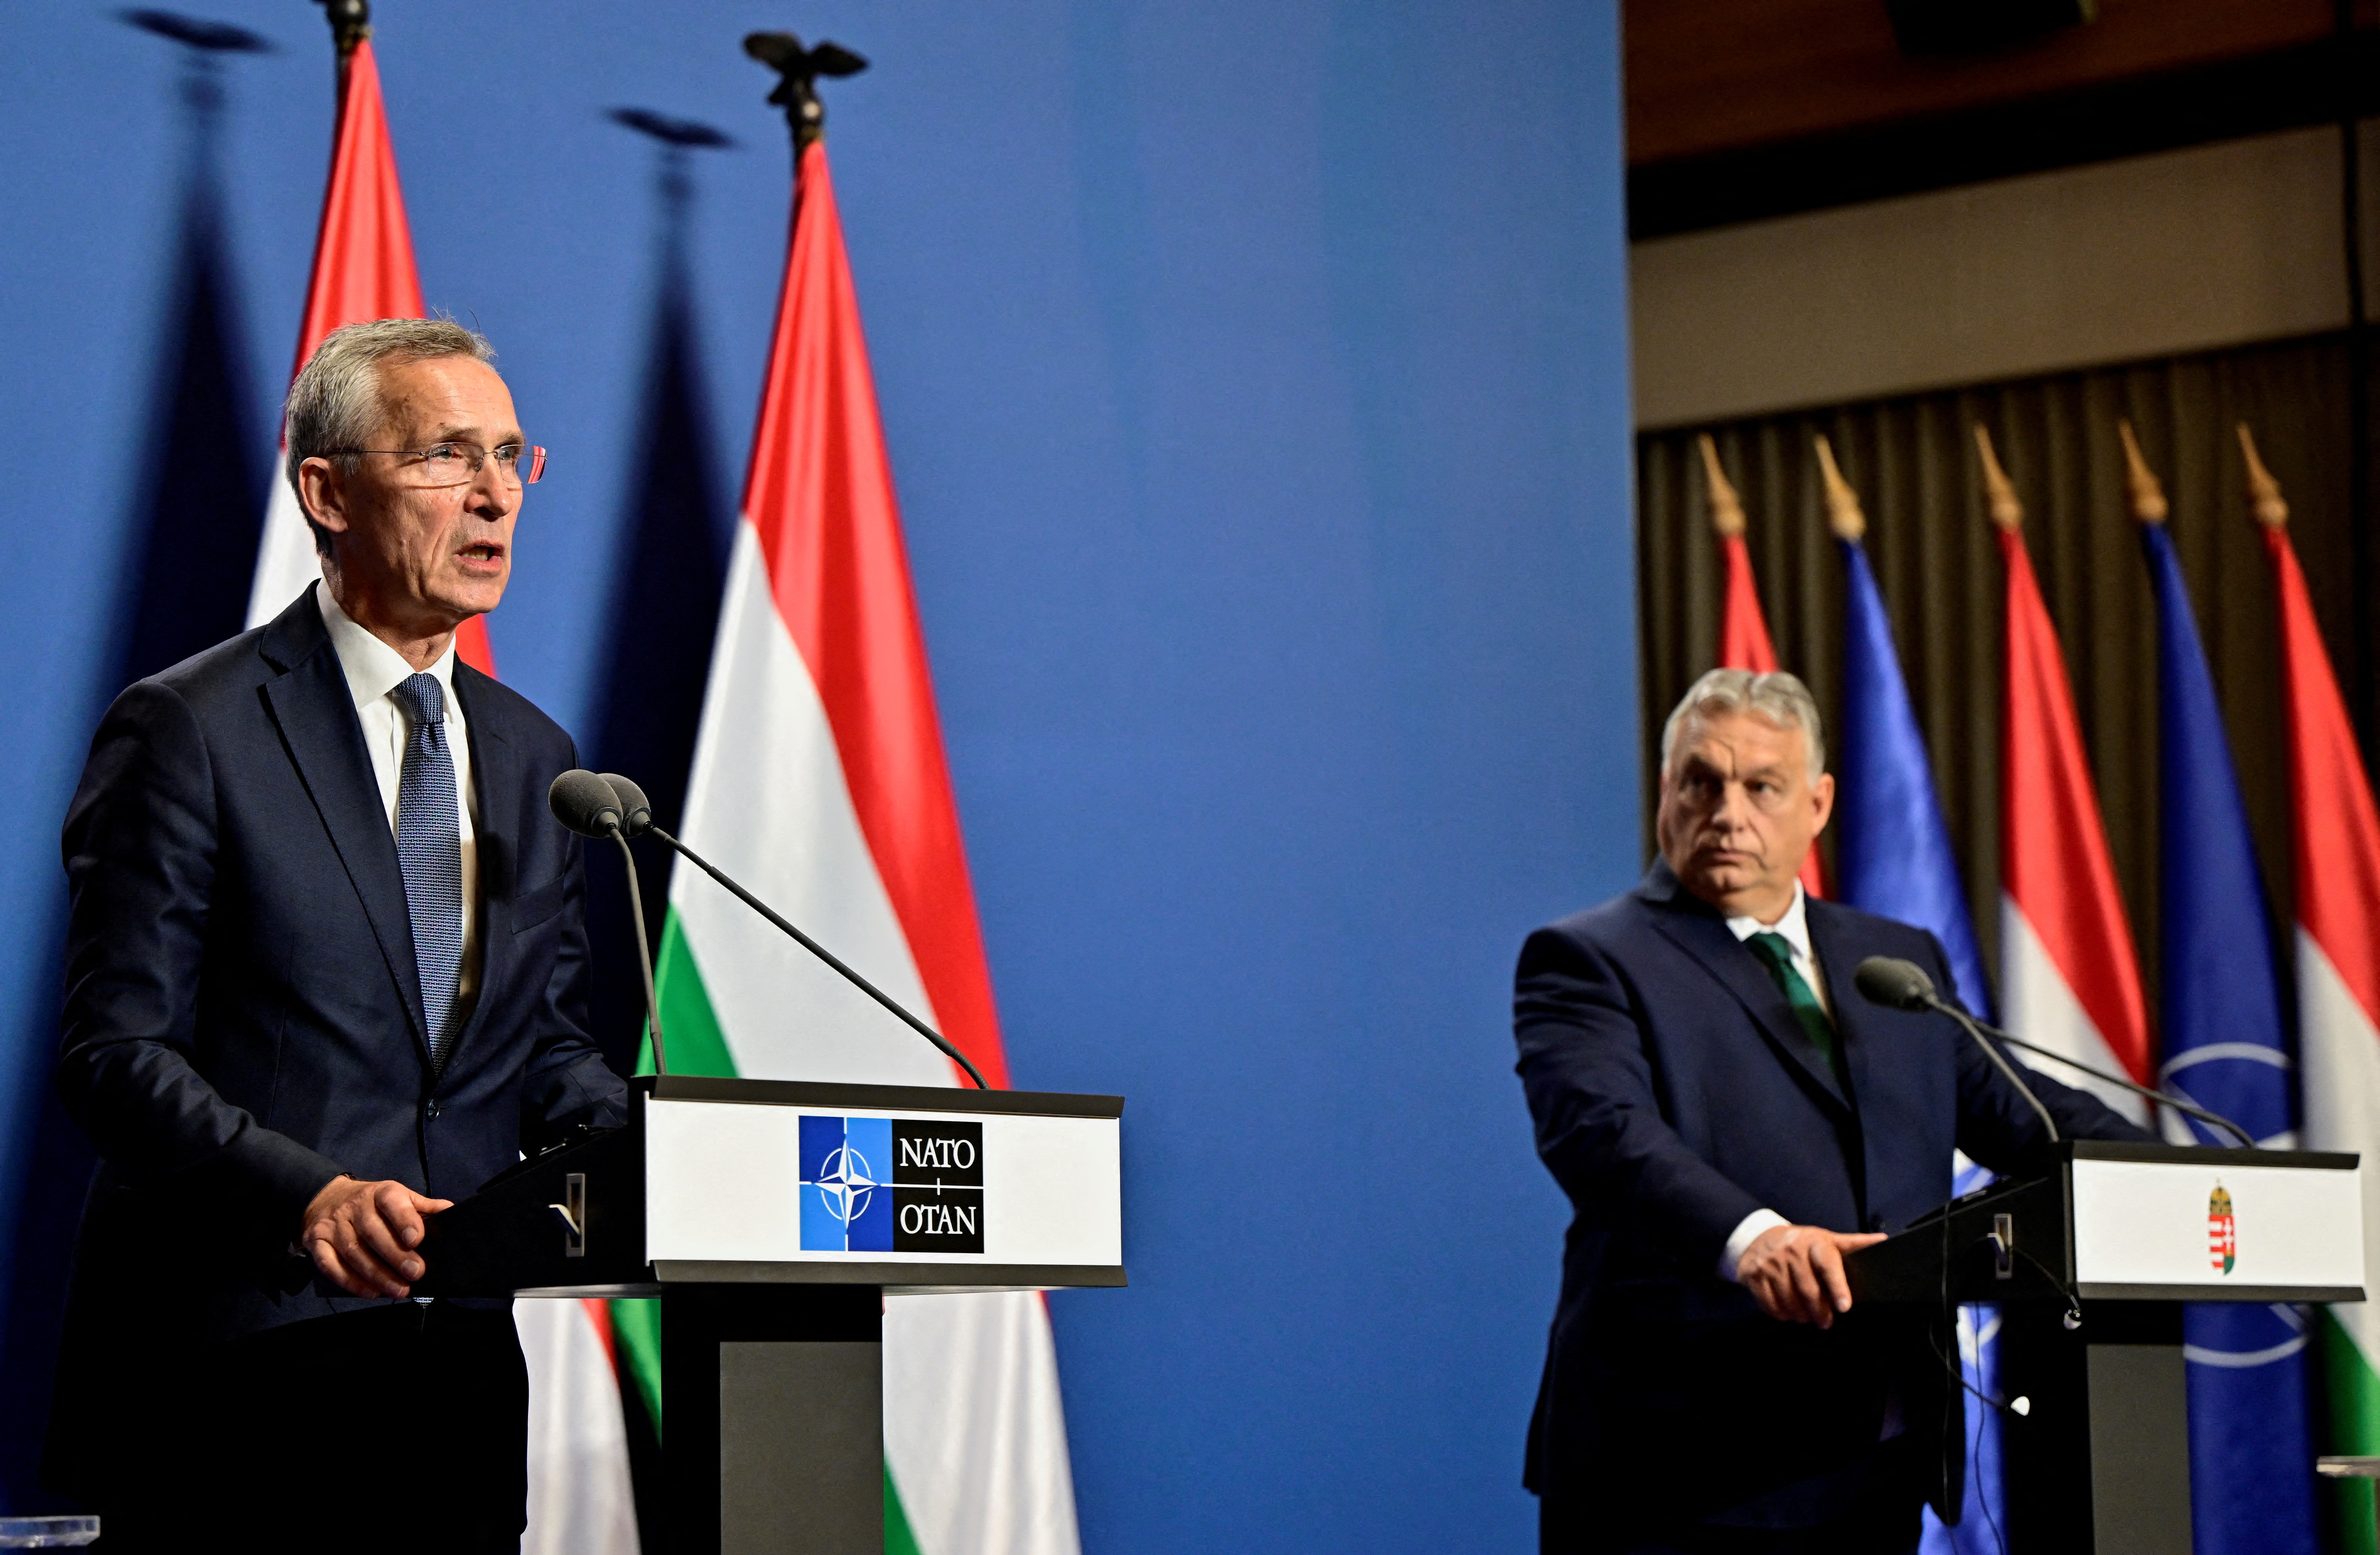 NATO Secretary General Stoltenberg meets with Hungarian PM Orban